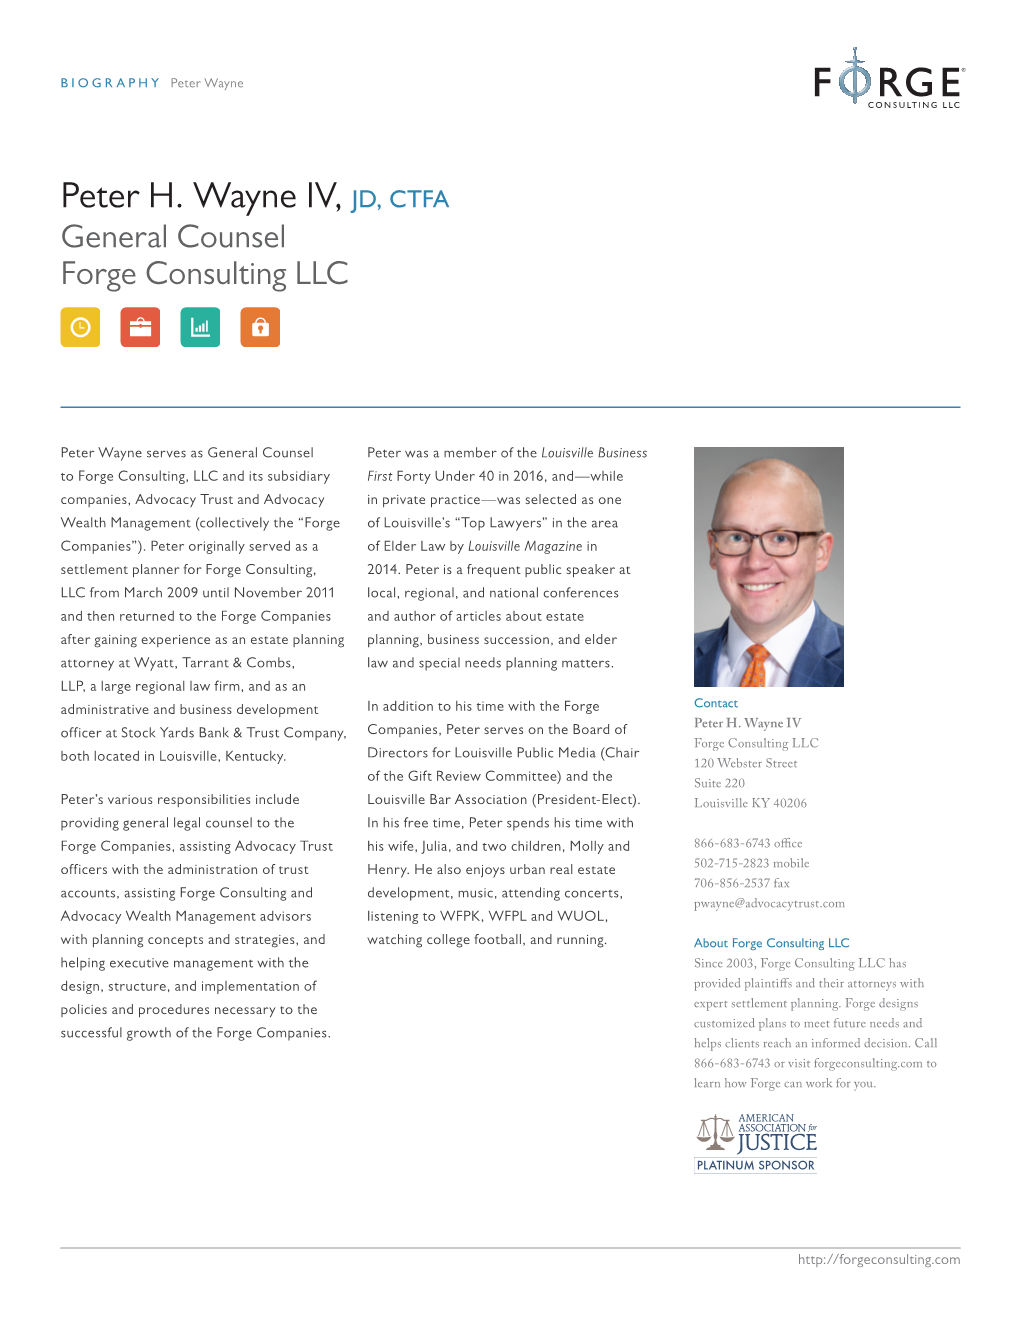 Peter H. Wayne IV, JD, CTFA General Counsel Forge Consulting LLC